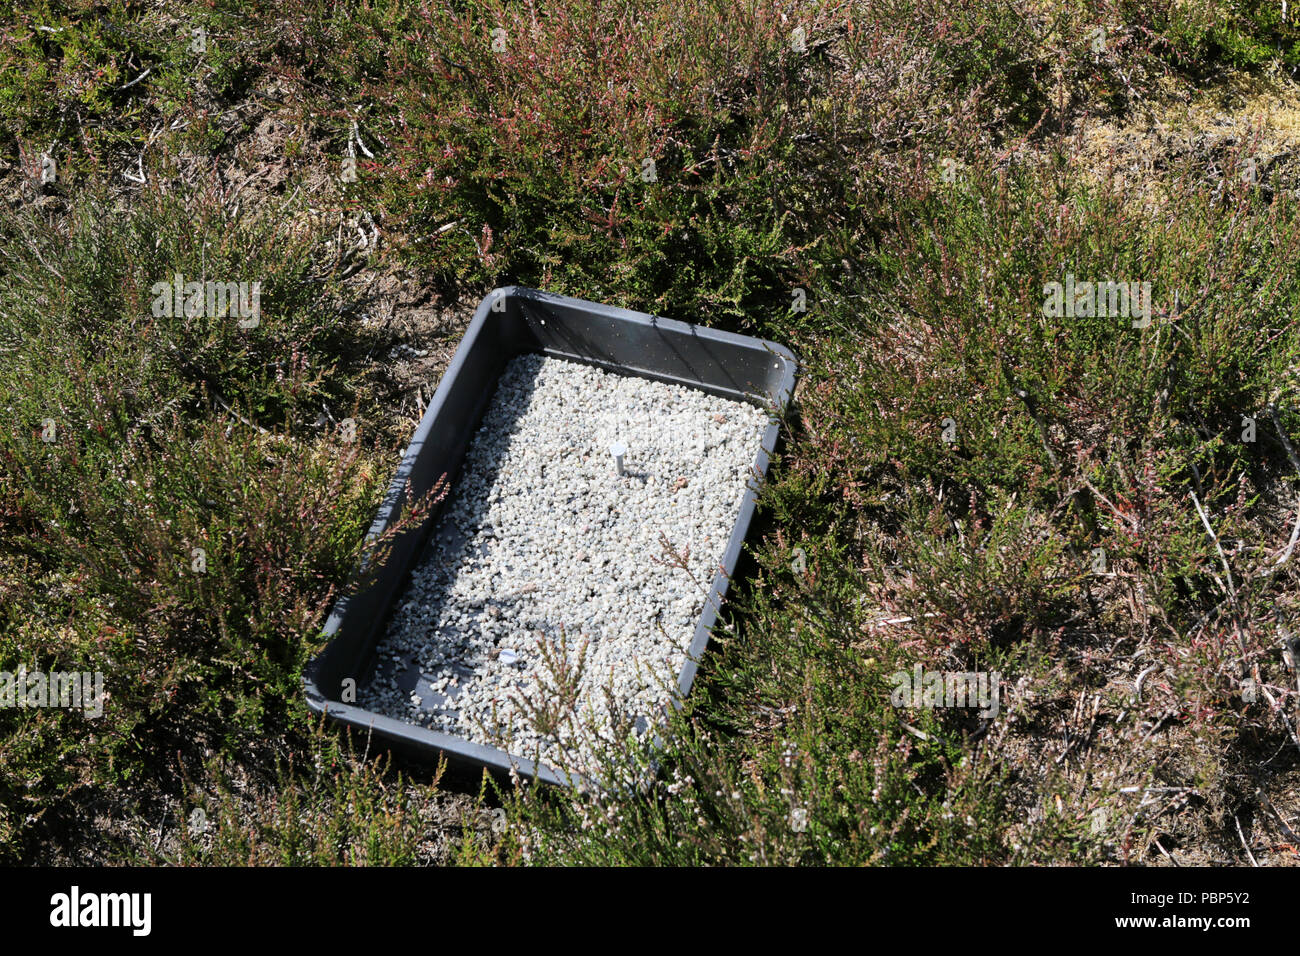 Tray for medicated grit to treat grouse for strongylosis or 'grouse disease' caused by Trichostrongylus Tenuis worm Stock Photo